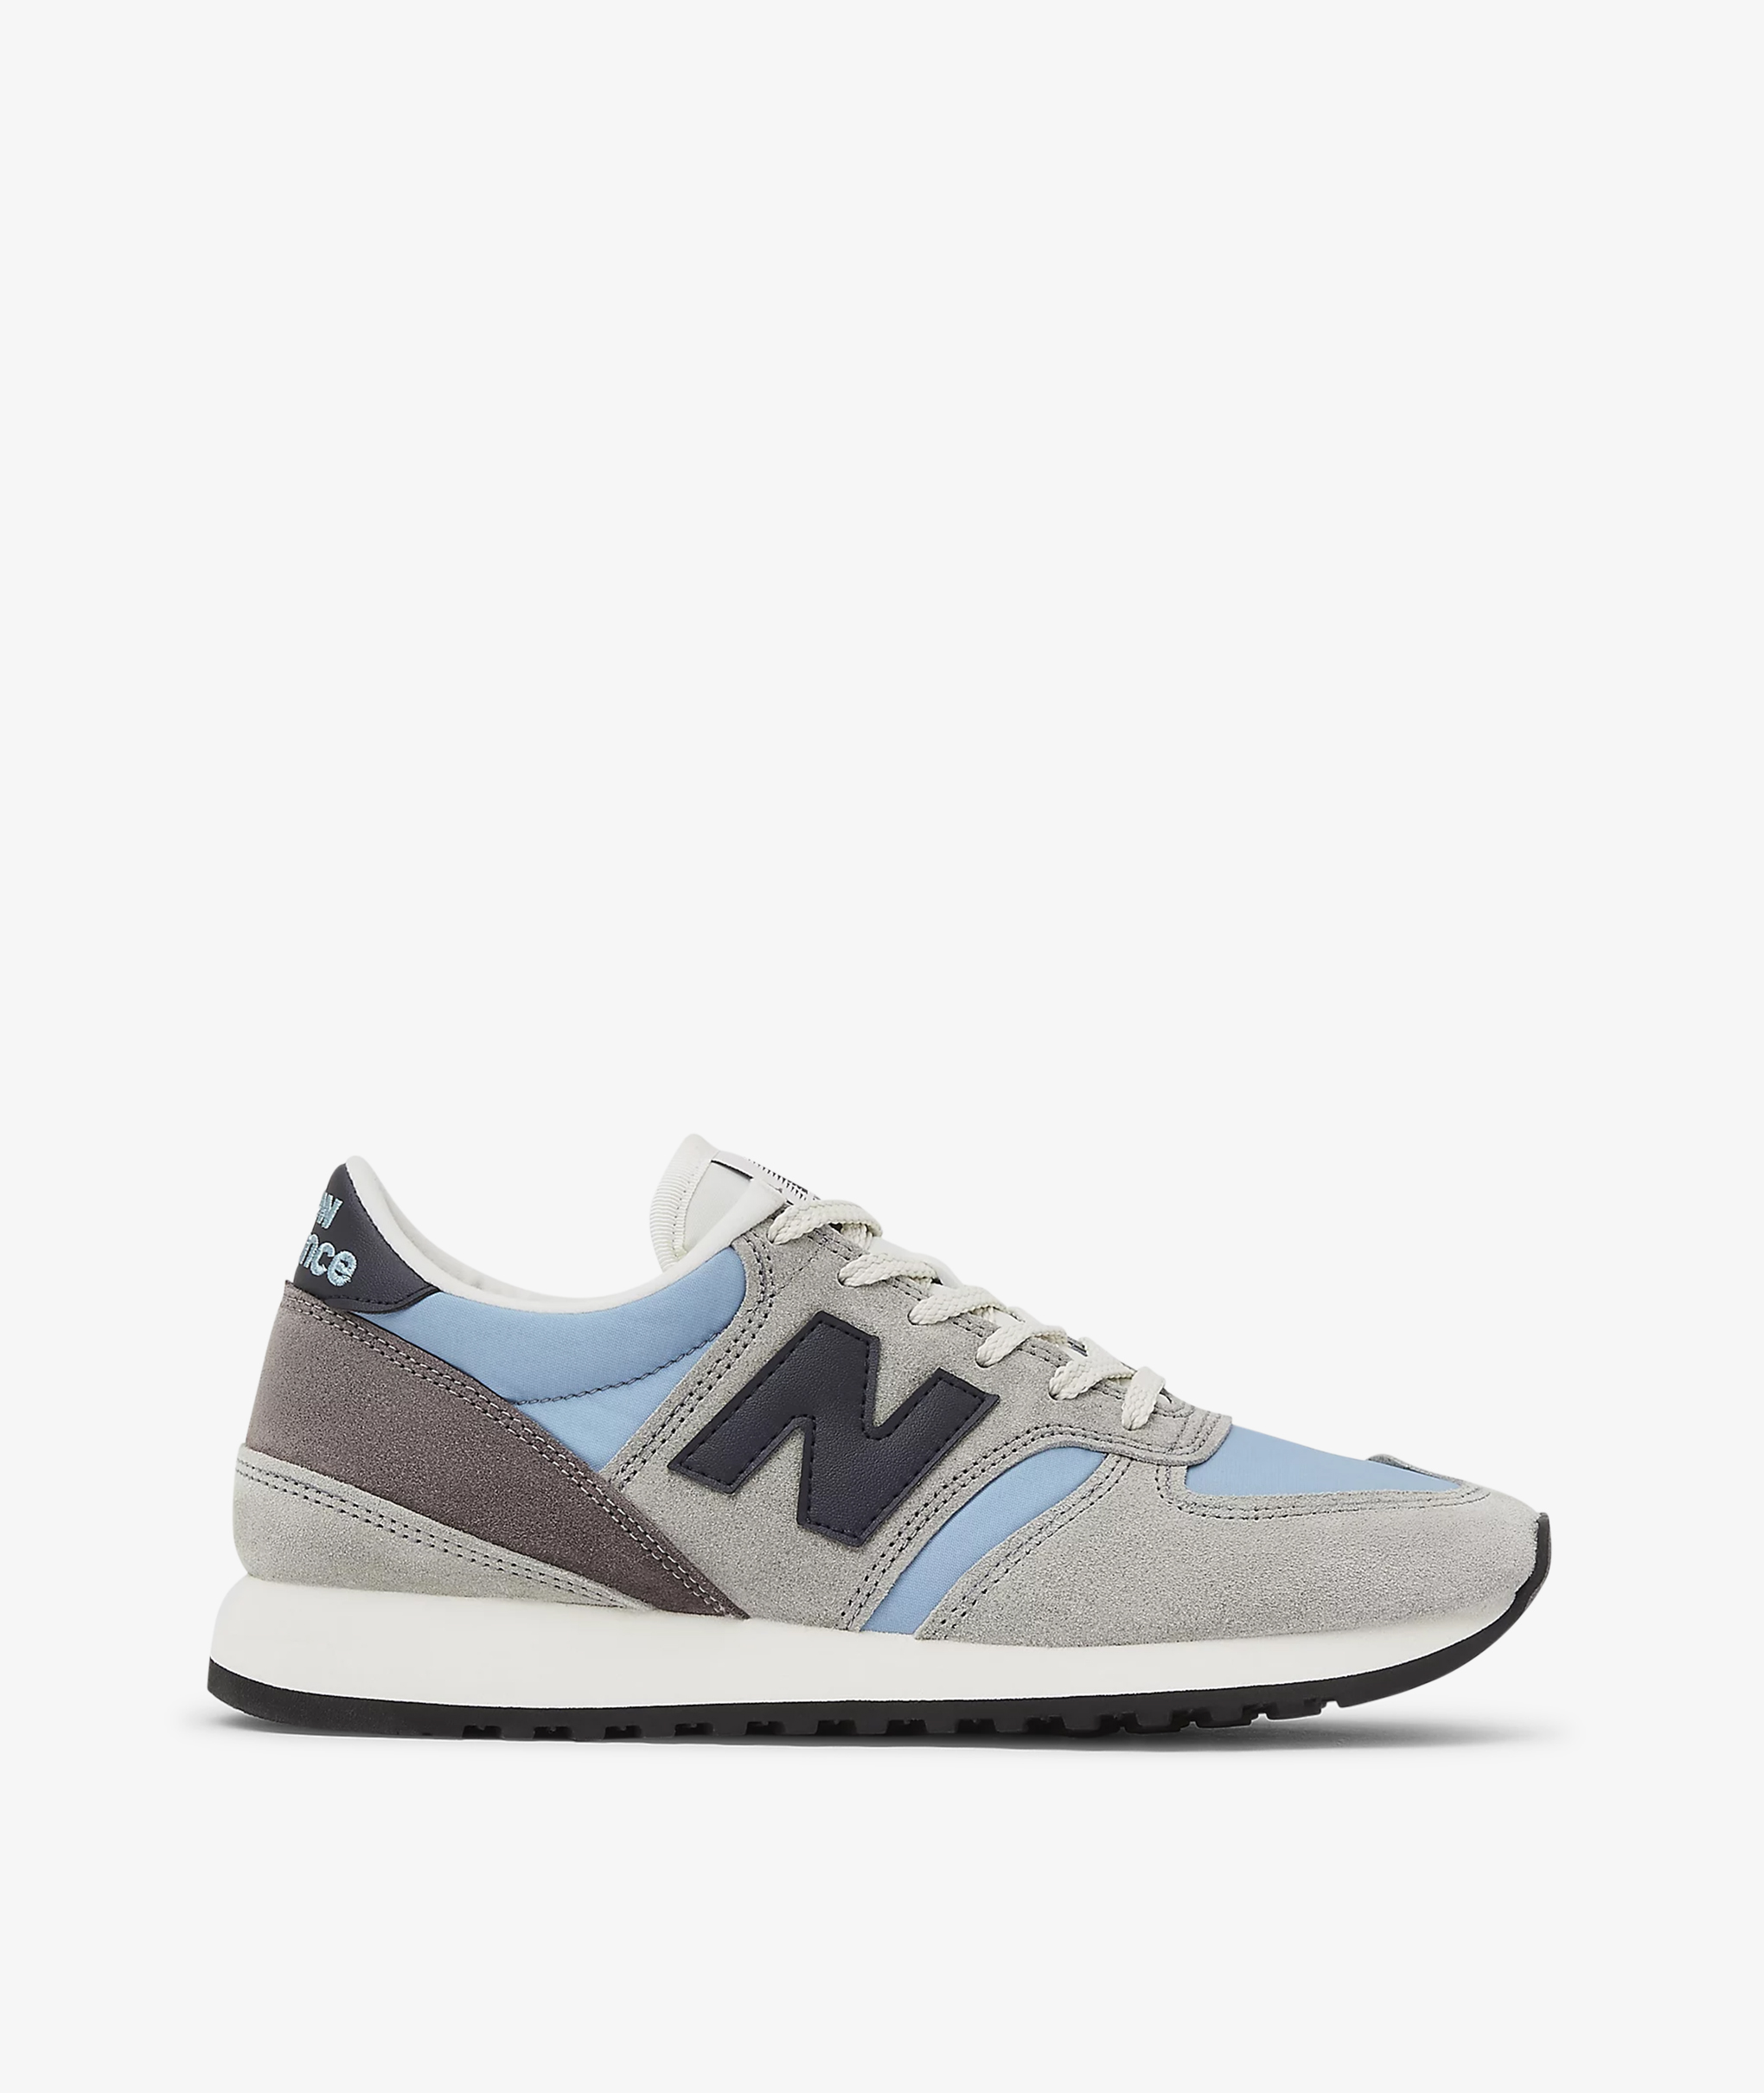 Norse Store | Shipping Worldwide - New Balance M730 - Pussywillow Gray ...